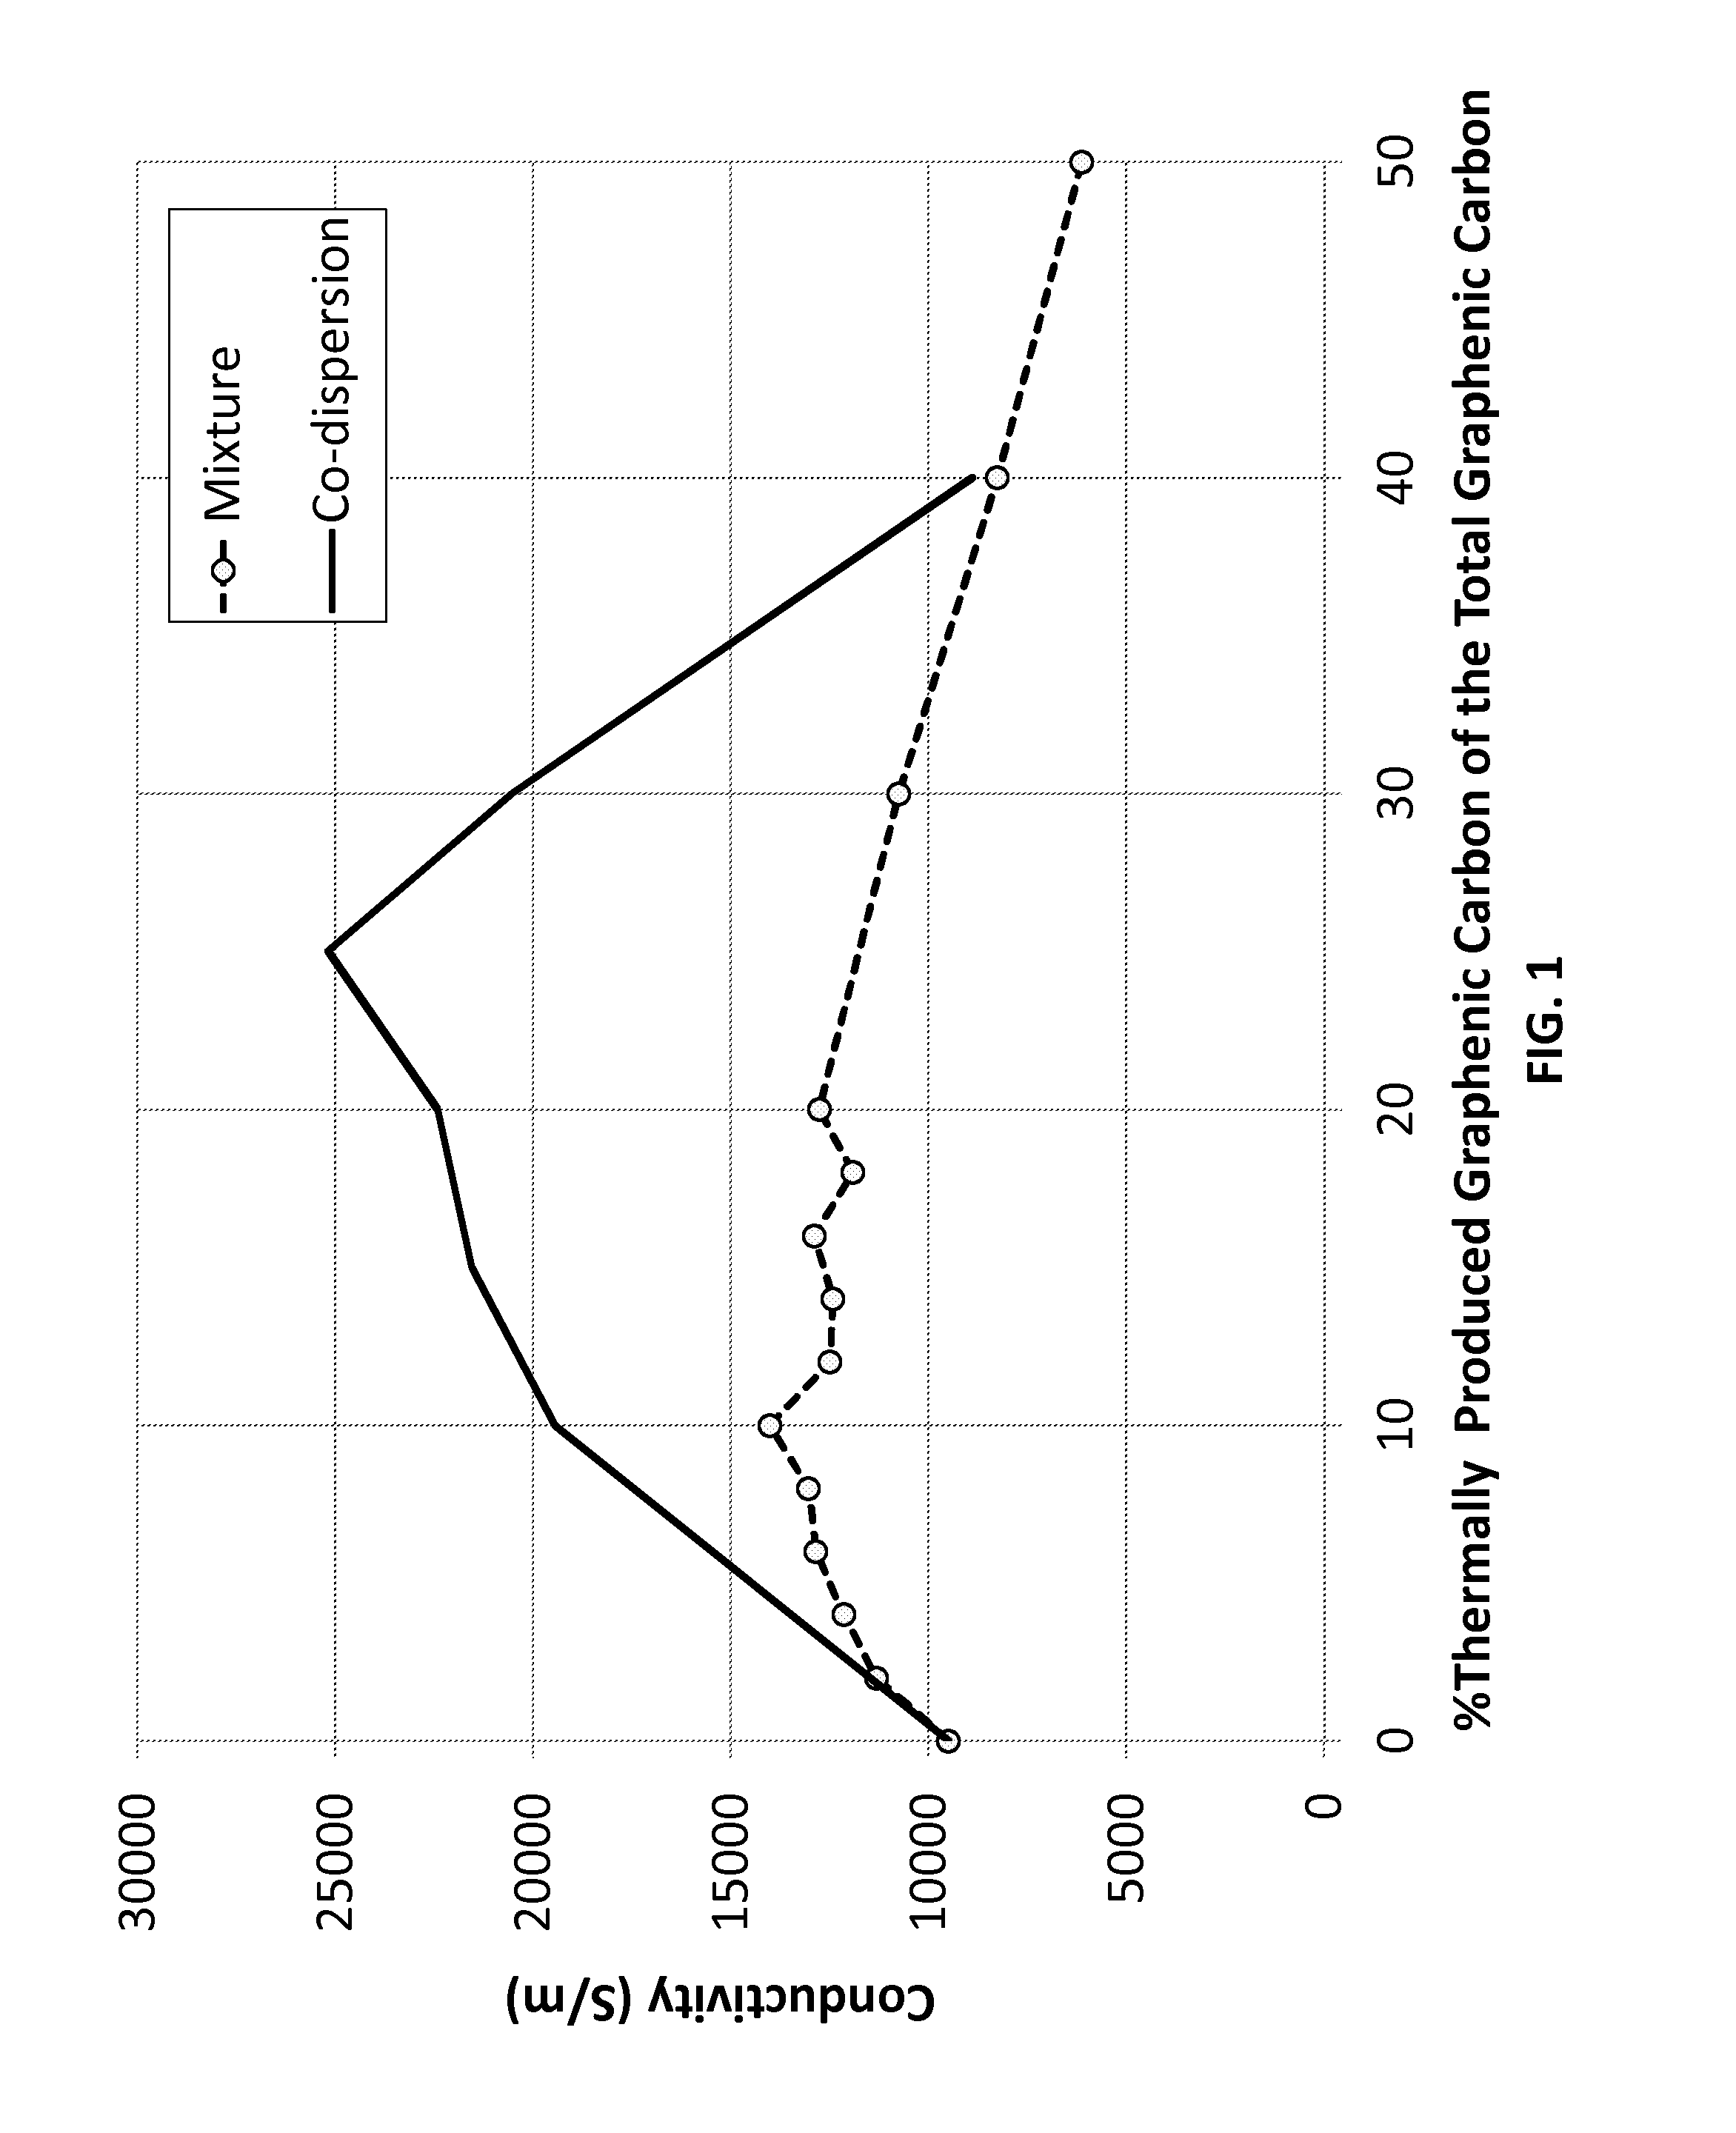 Graphenic carbon particle co-dispersions and methods of making same